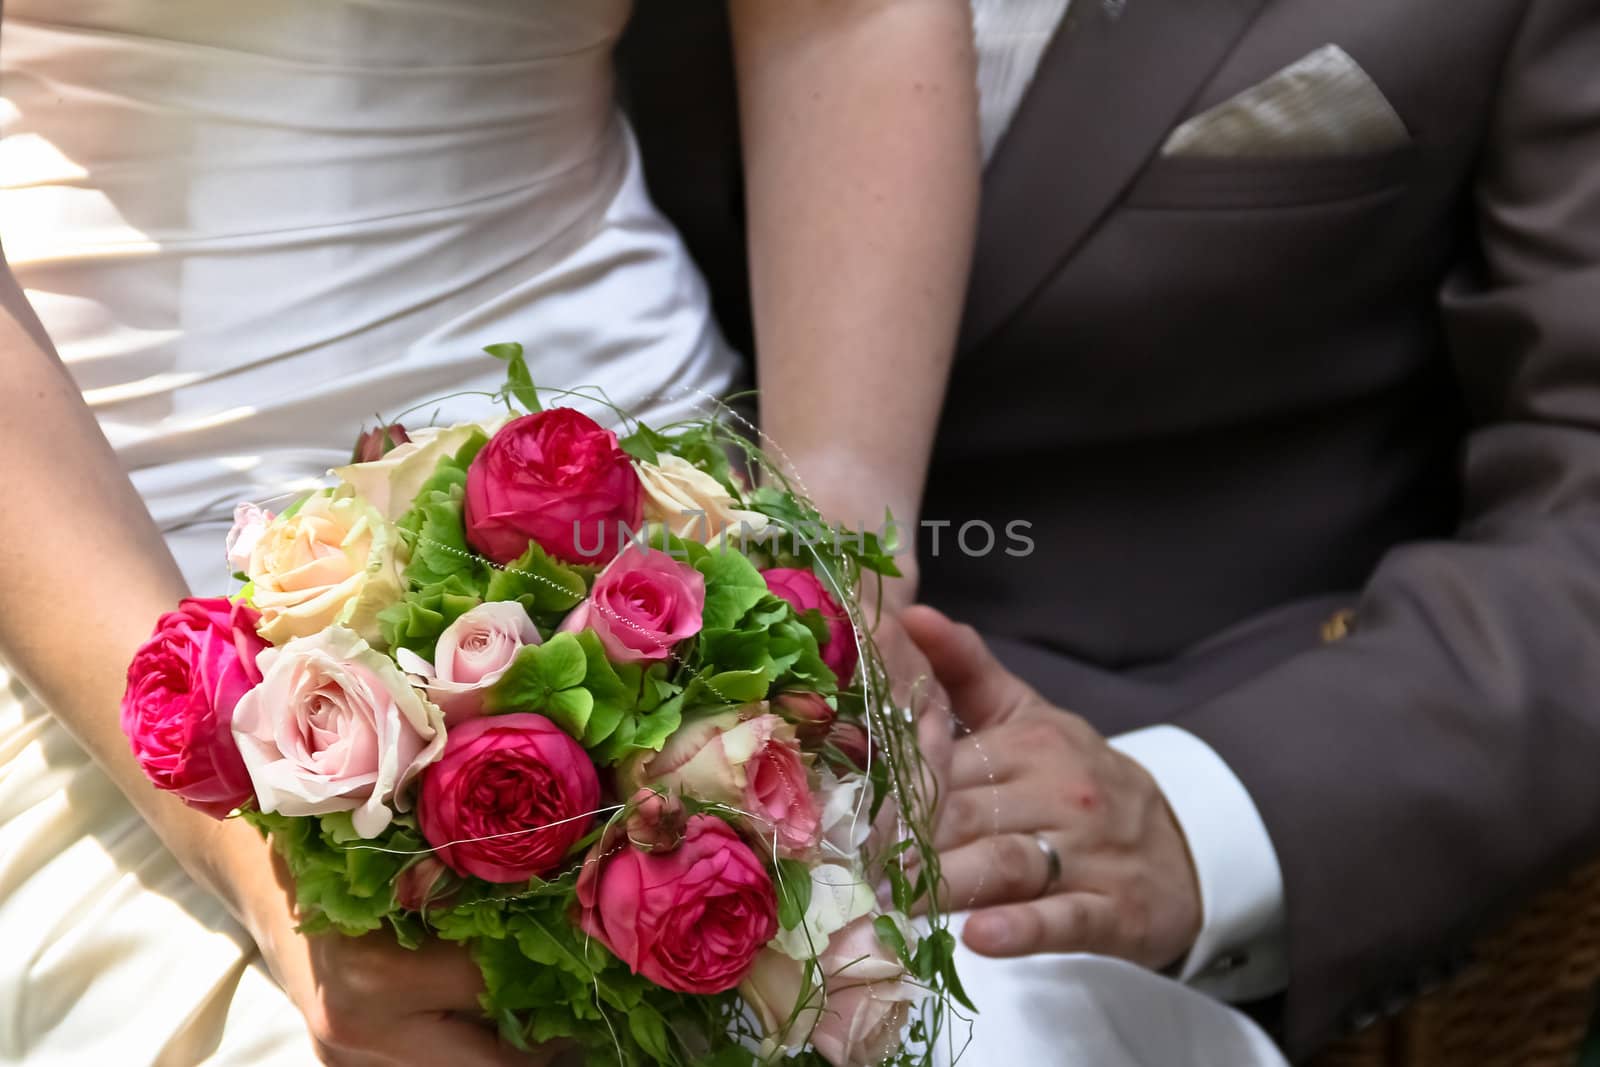 A newly wed couple showing off the bride's bouquet